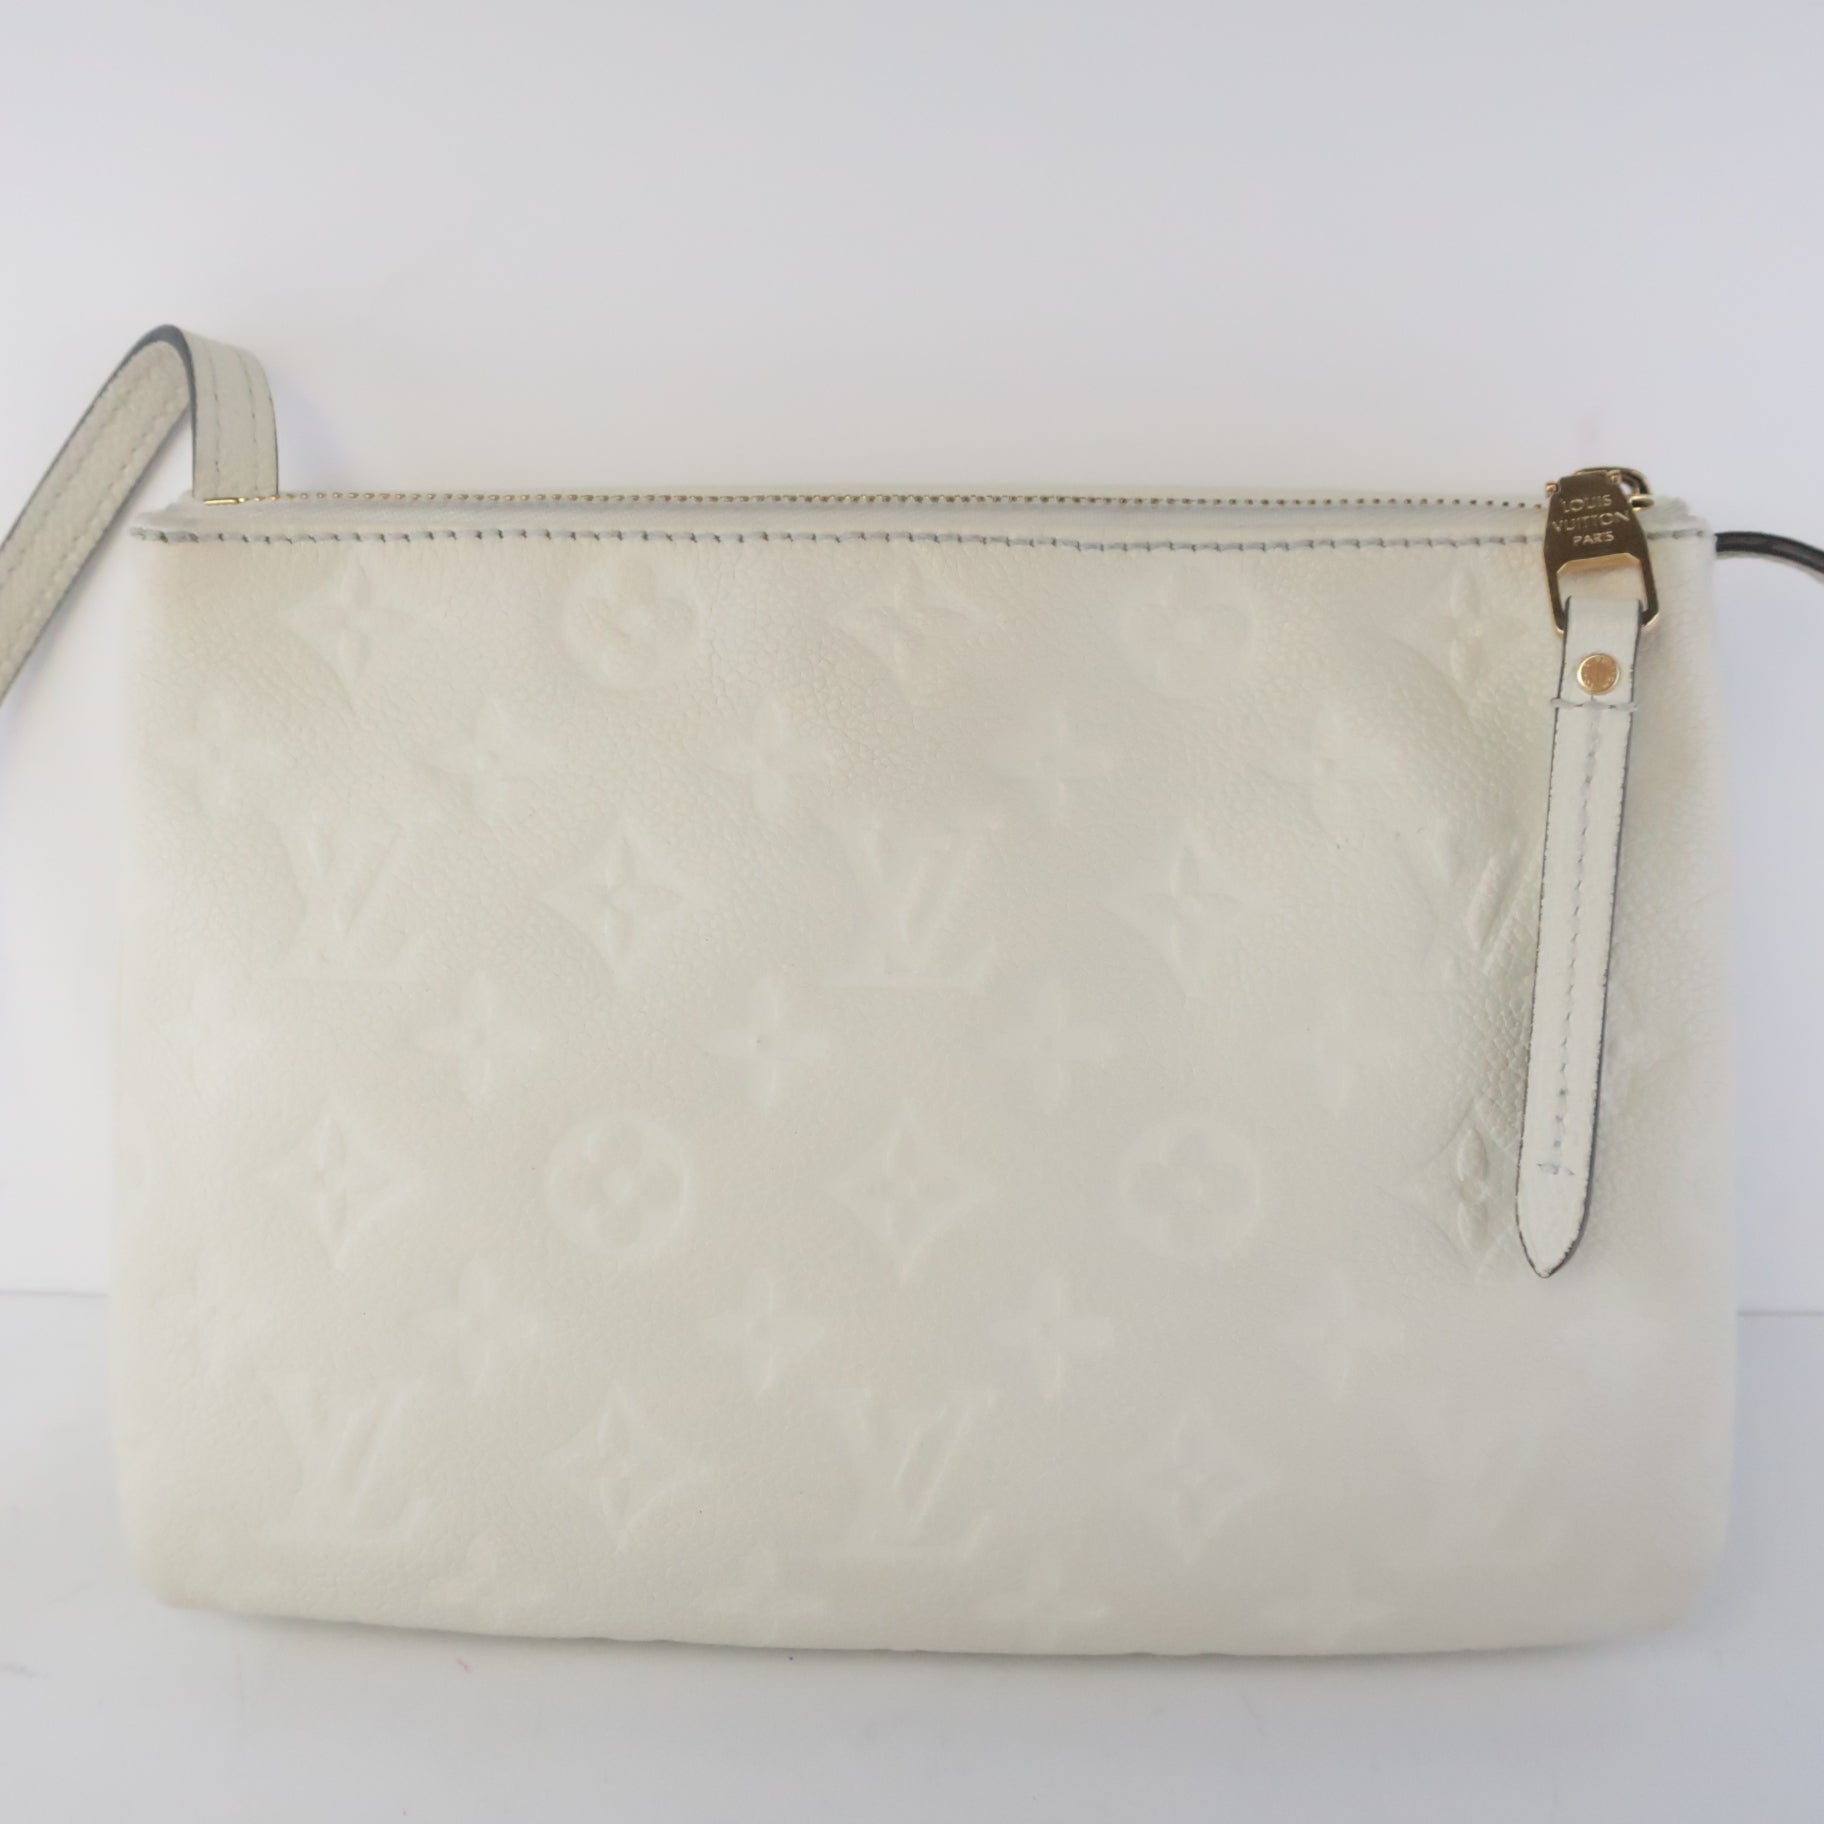 How To Clean Your White Luxury Handbag and Make Sure It Stays White How Do You Keep White Leather From Turning Yellow?